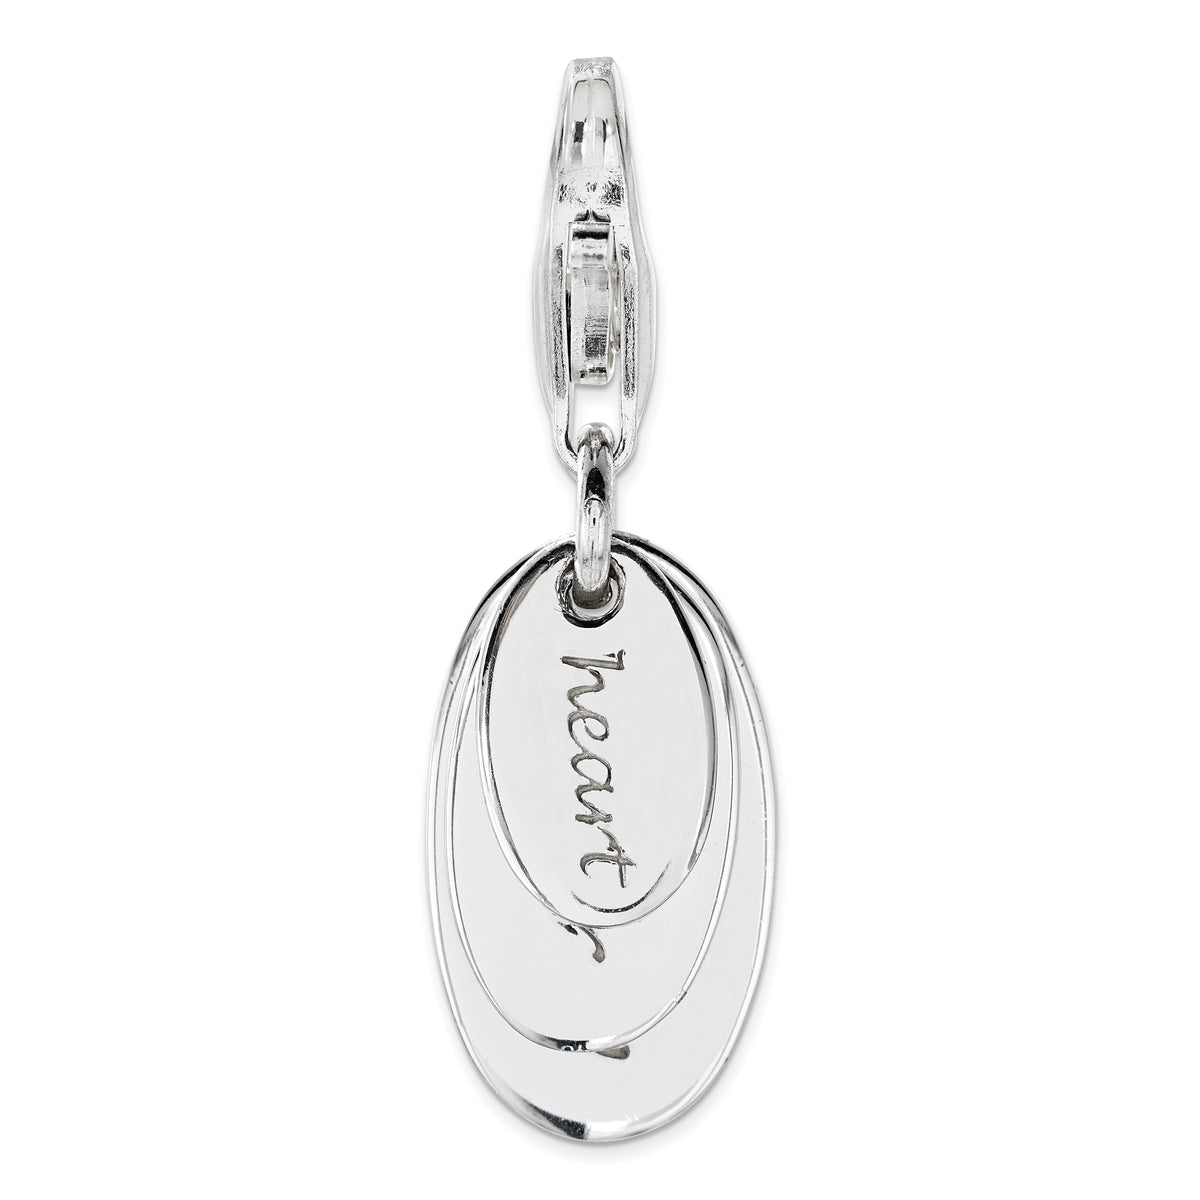 Sterling Silver Polished Follow Your Heart Lobster Clasp Charm